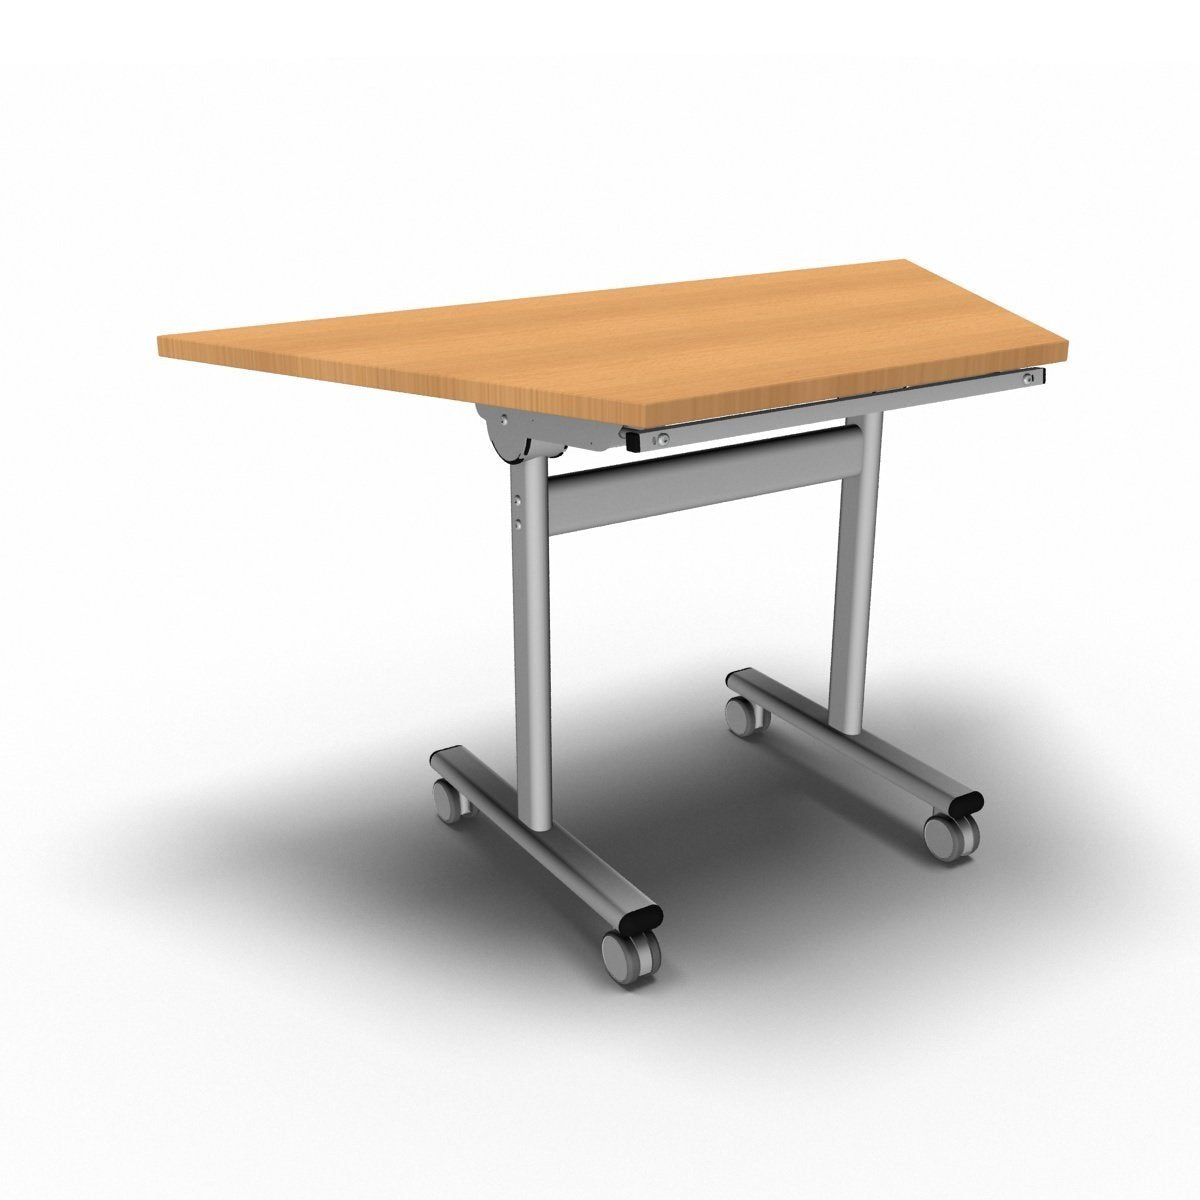 Table 1200 x 600 x 720mm / Trapezoidal / Beech Synergy Flip Top Tables